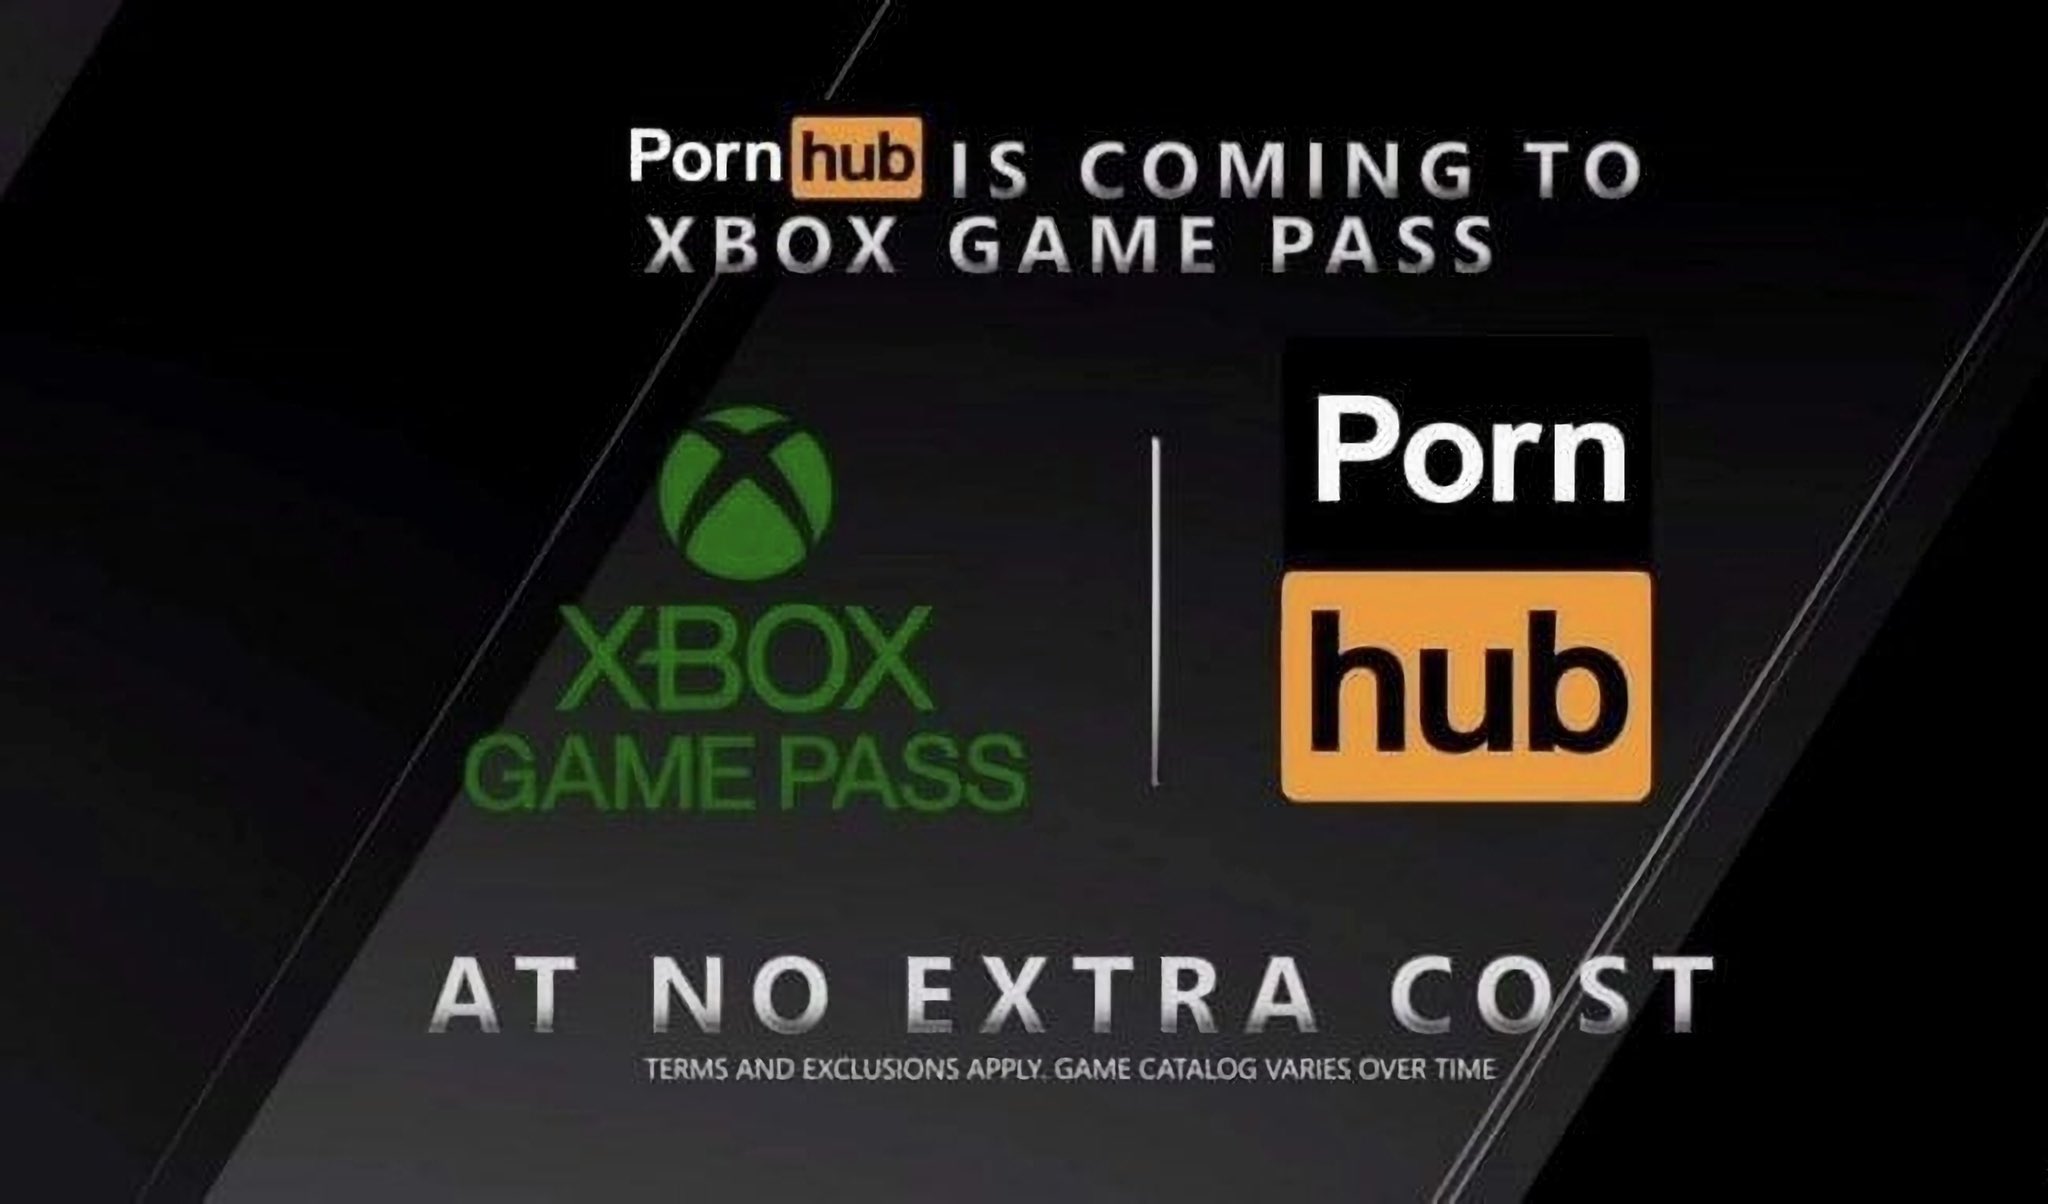 Beperkt Sociale wetenschappen gokken Bullexto on Twitter: "Big news: Pornhub Premium will be included with Xbox  Game Pass starting on 2/8 at no additional cost https://t.co/oxjkMQLz7I" /  Twitter